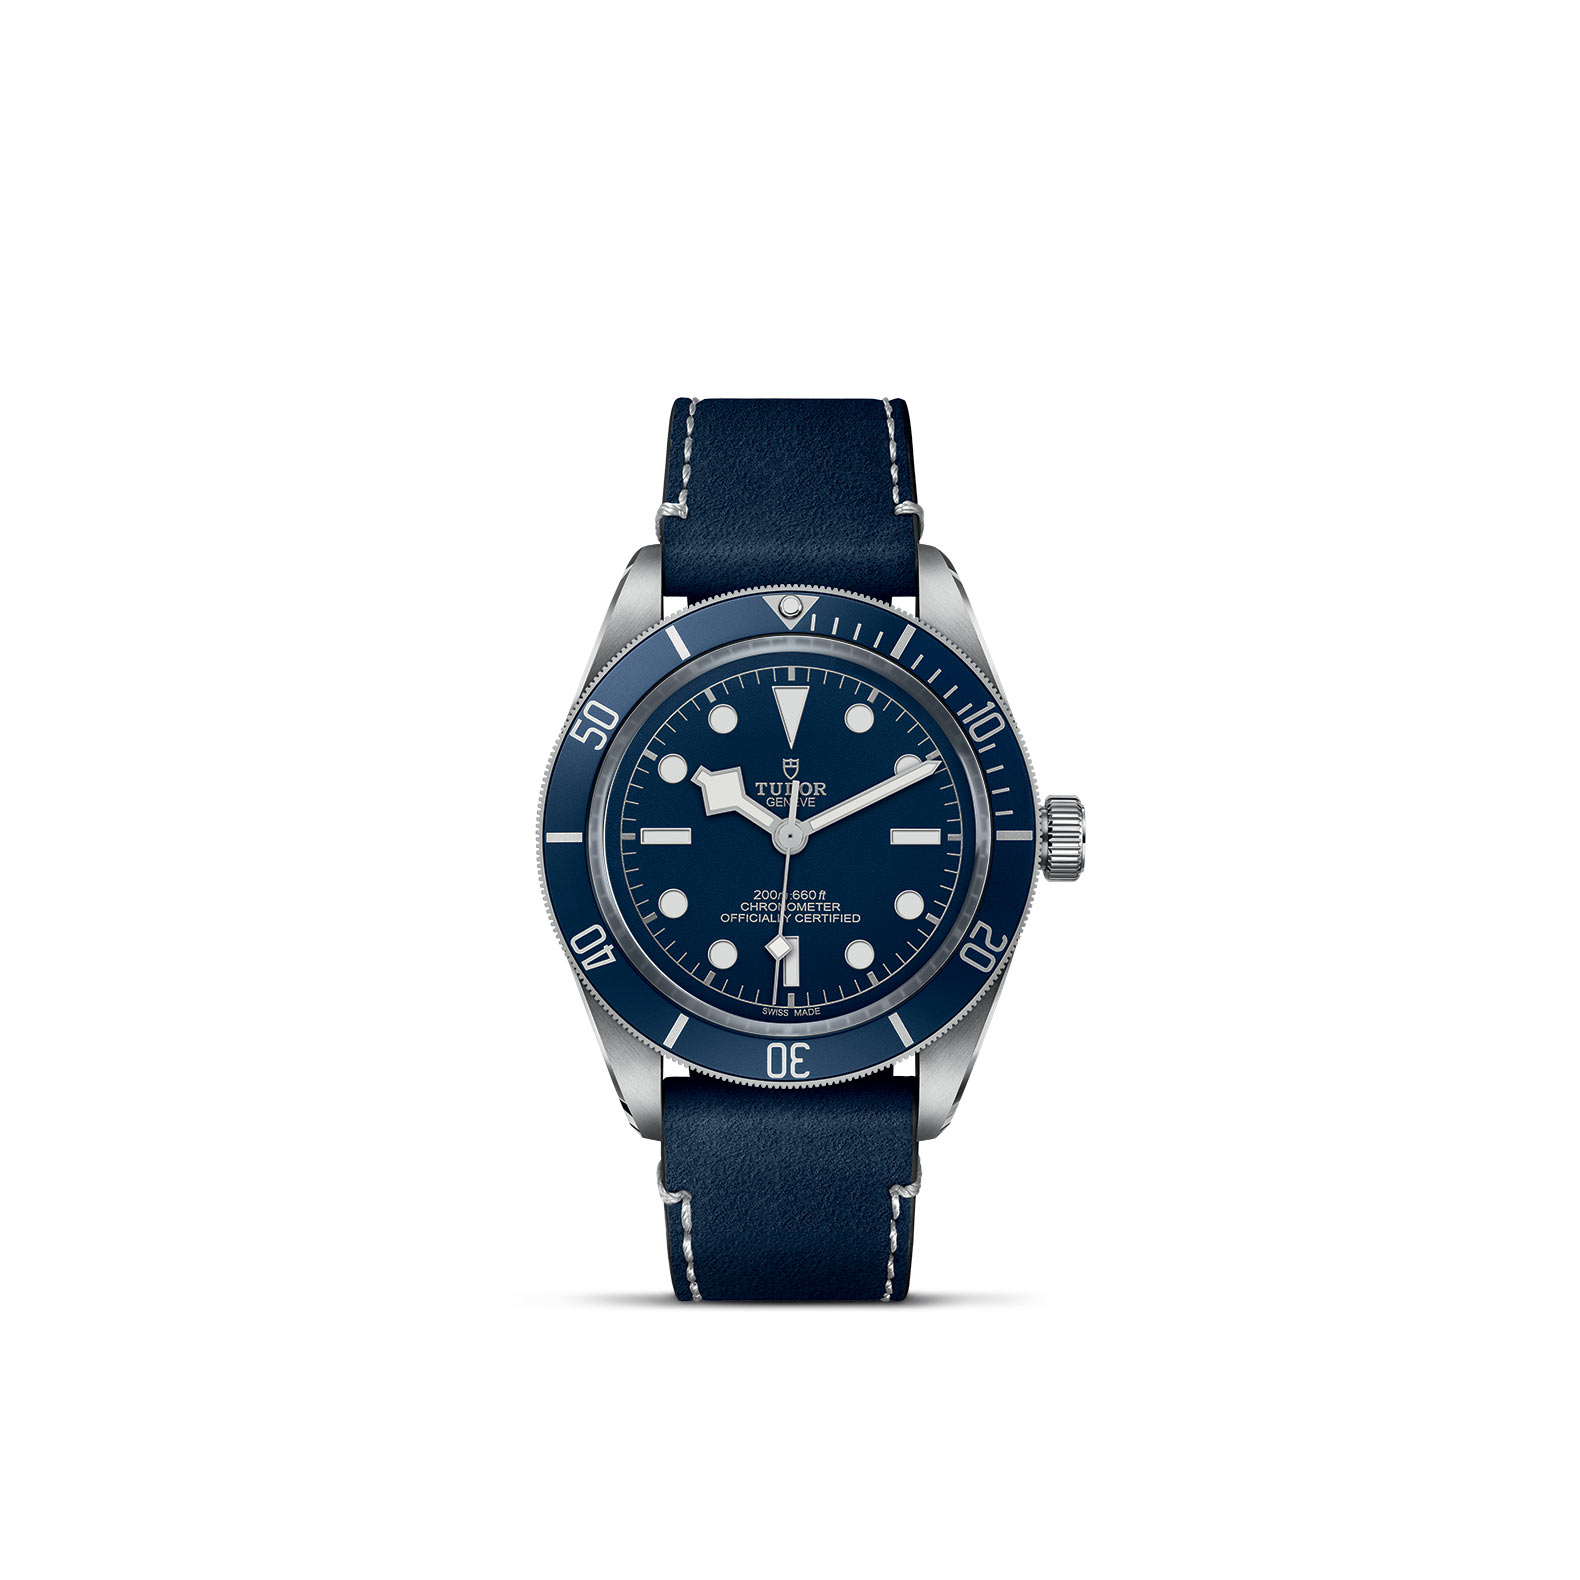 TUDOR BLACK BAY 58 standing upright, highlighting its classic design against a white background.